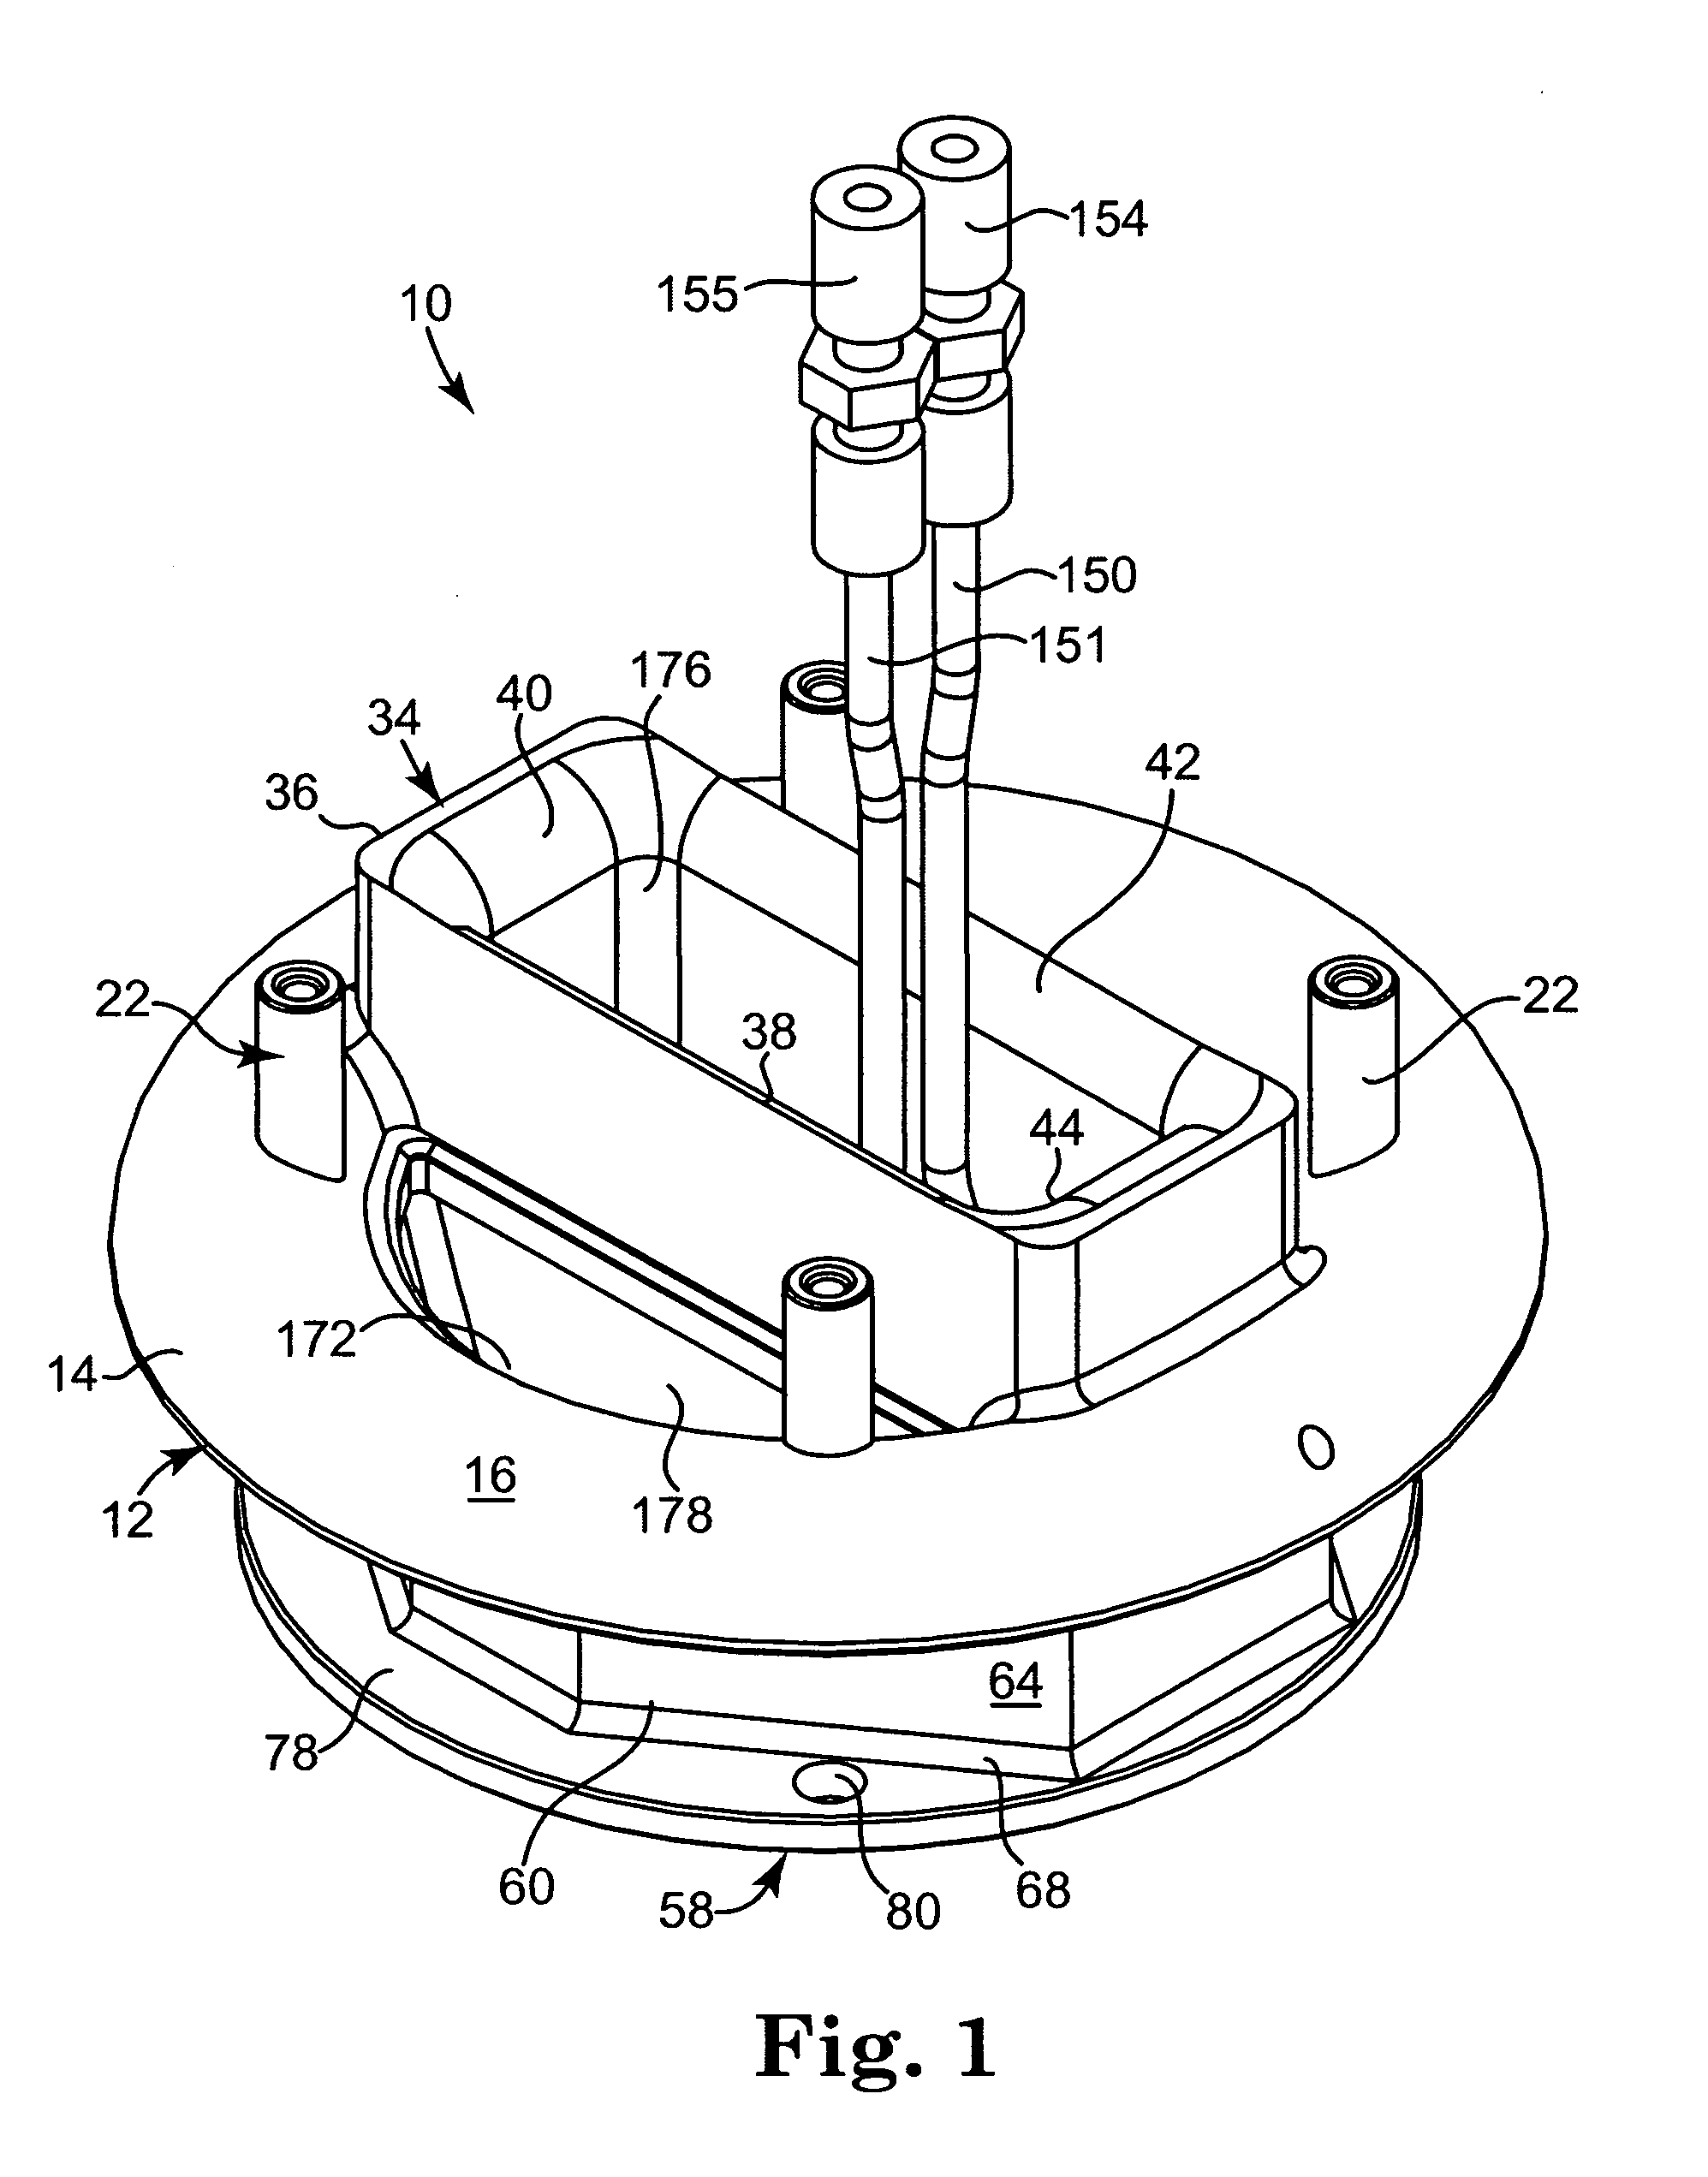 Rinsing methodologies for barrier plate and venturi containment systems in tools used to process microelectronic workpieces with one or more treatment fluids, and related apparatuses